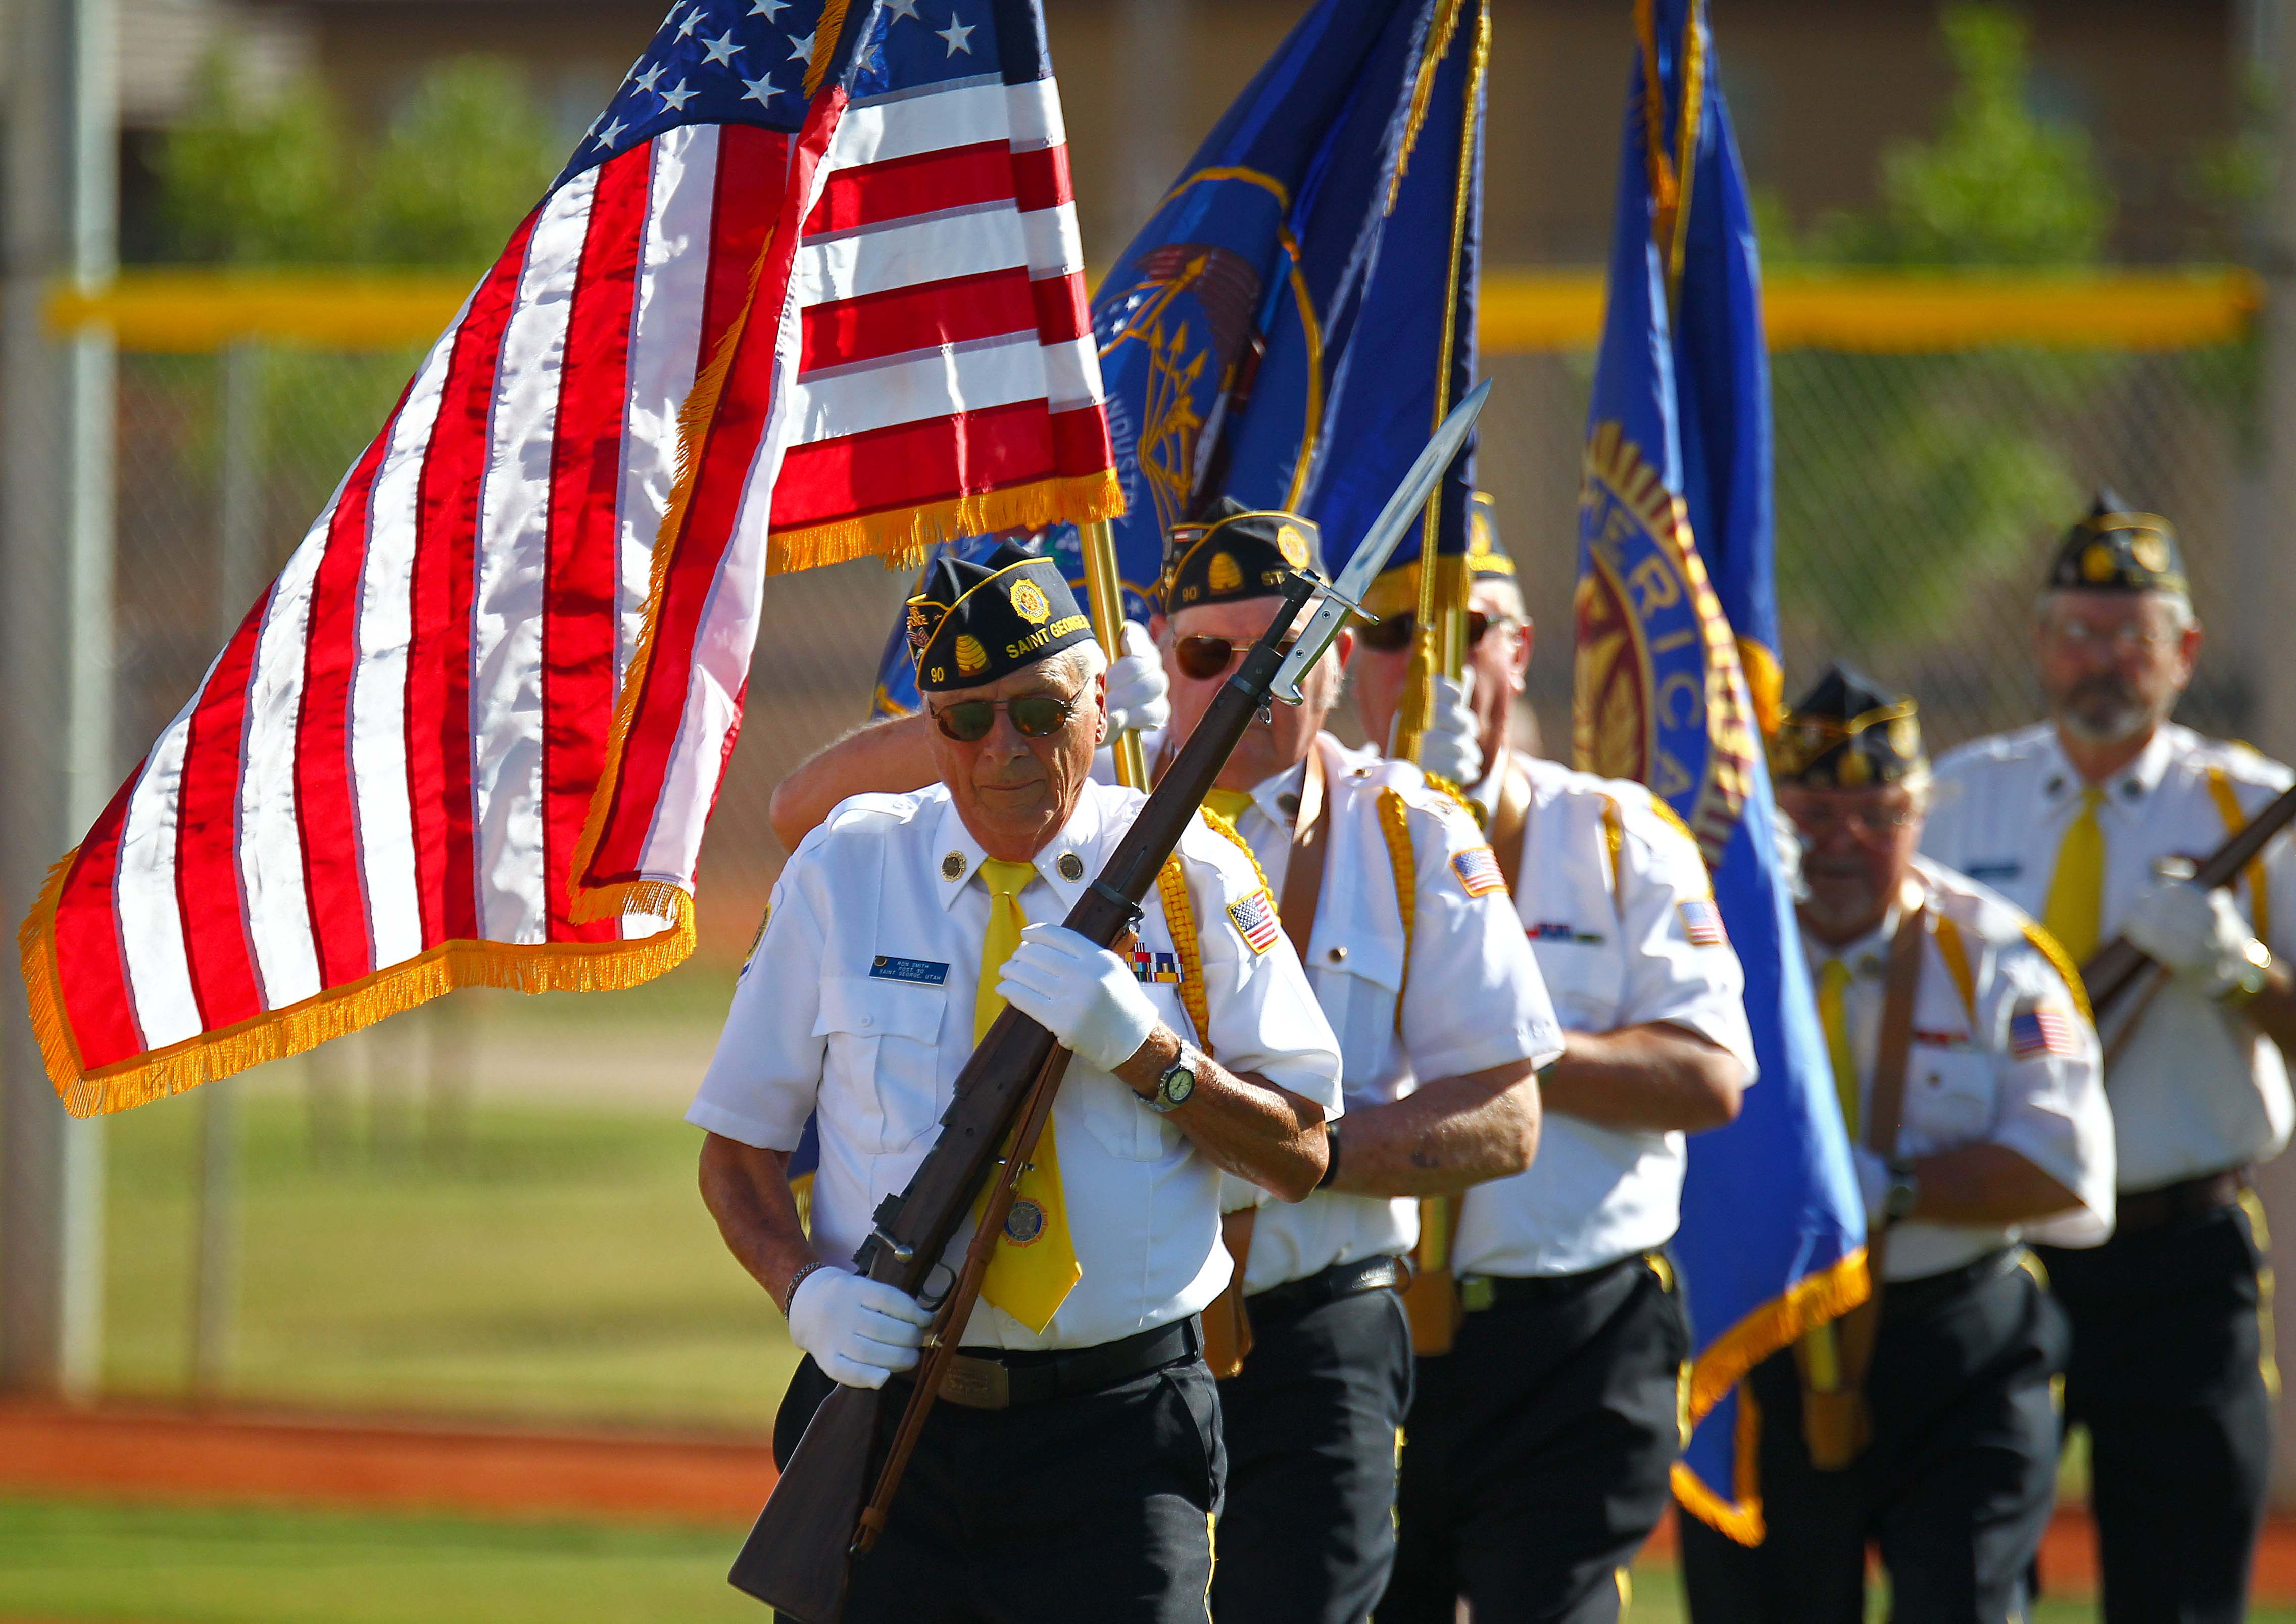 Local American Legion teams providing golden opportunities for young